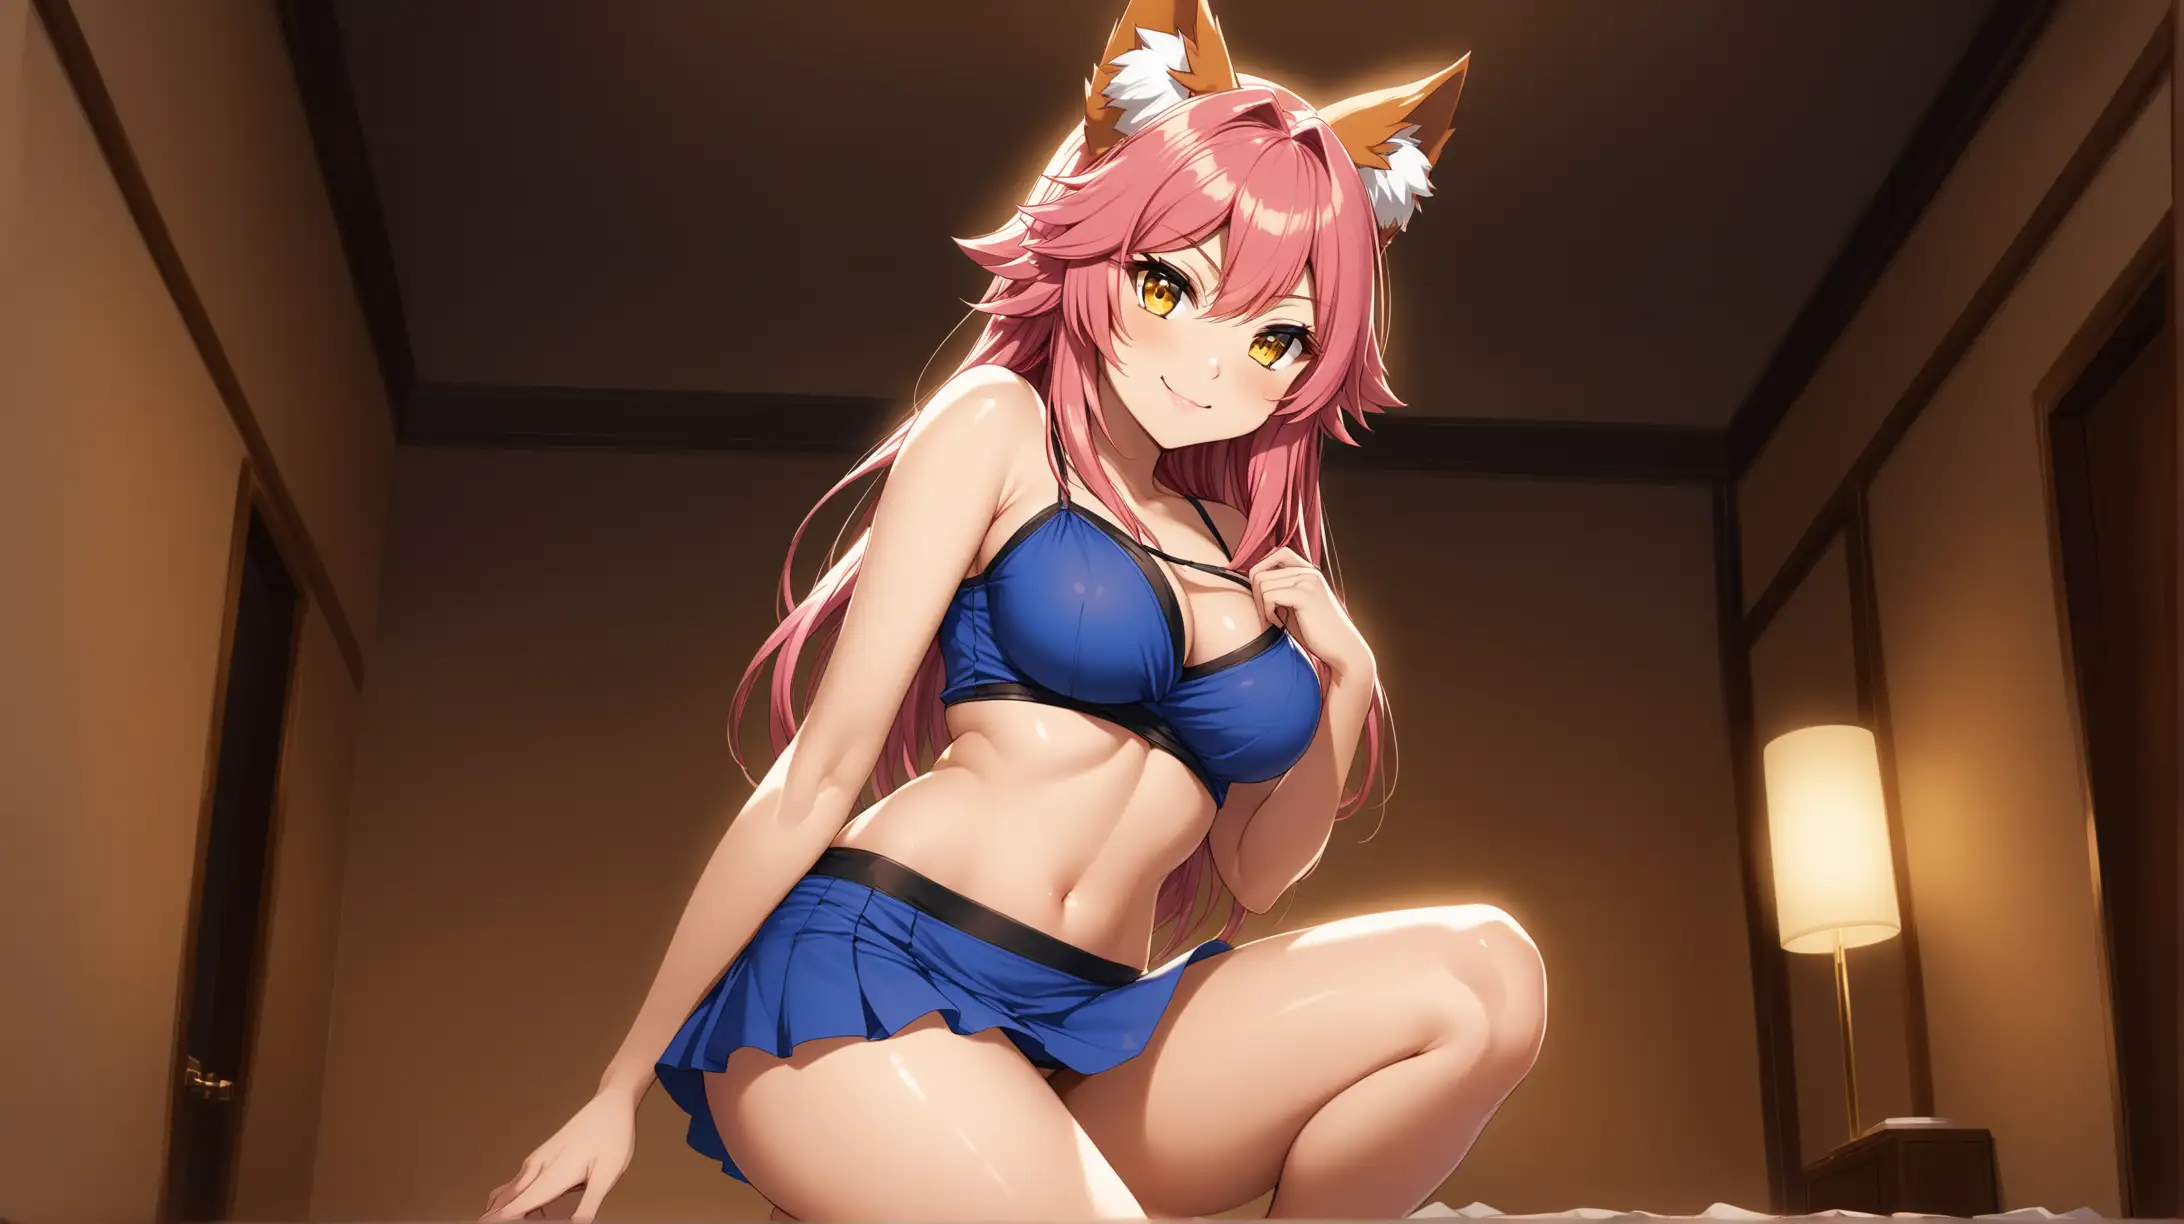 Seductive Tamamo no Mae with Pink Hair and Gold Eyes in Dim Lighting